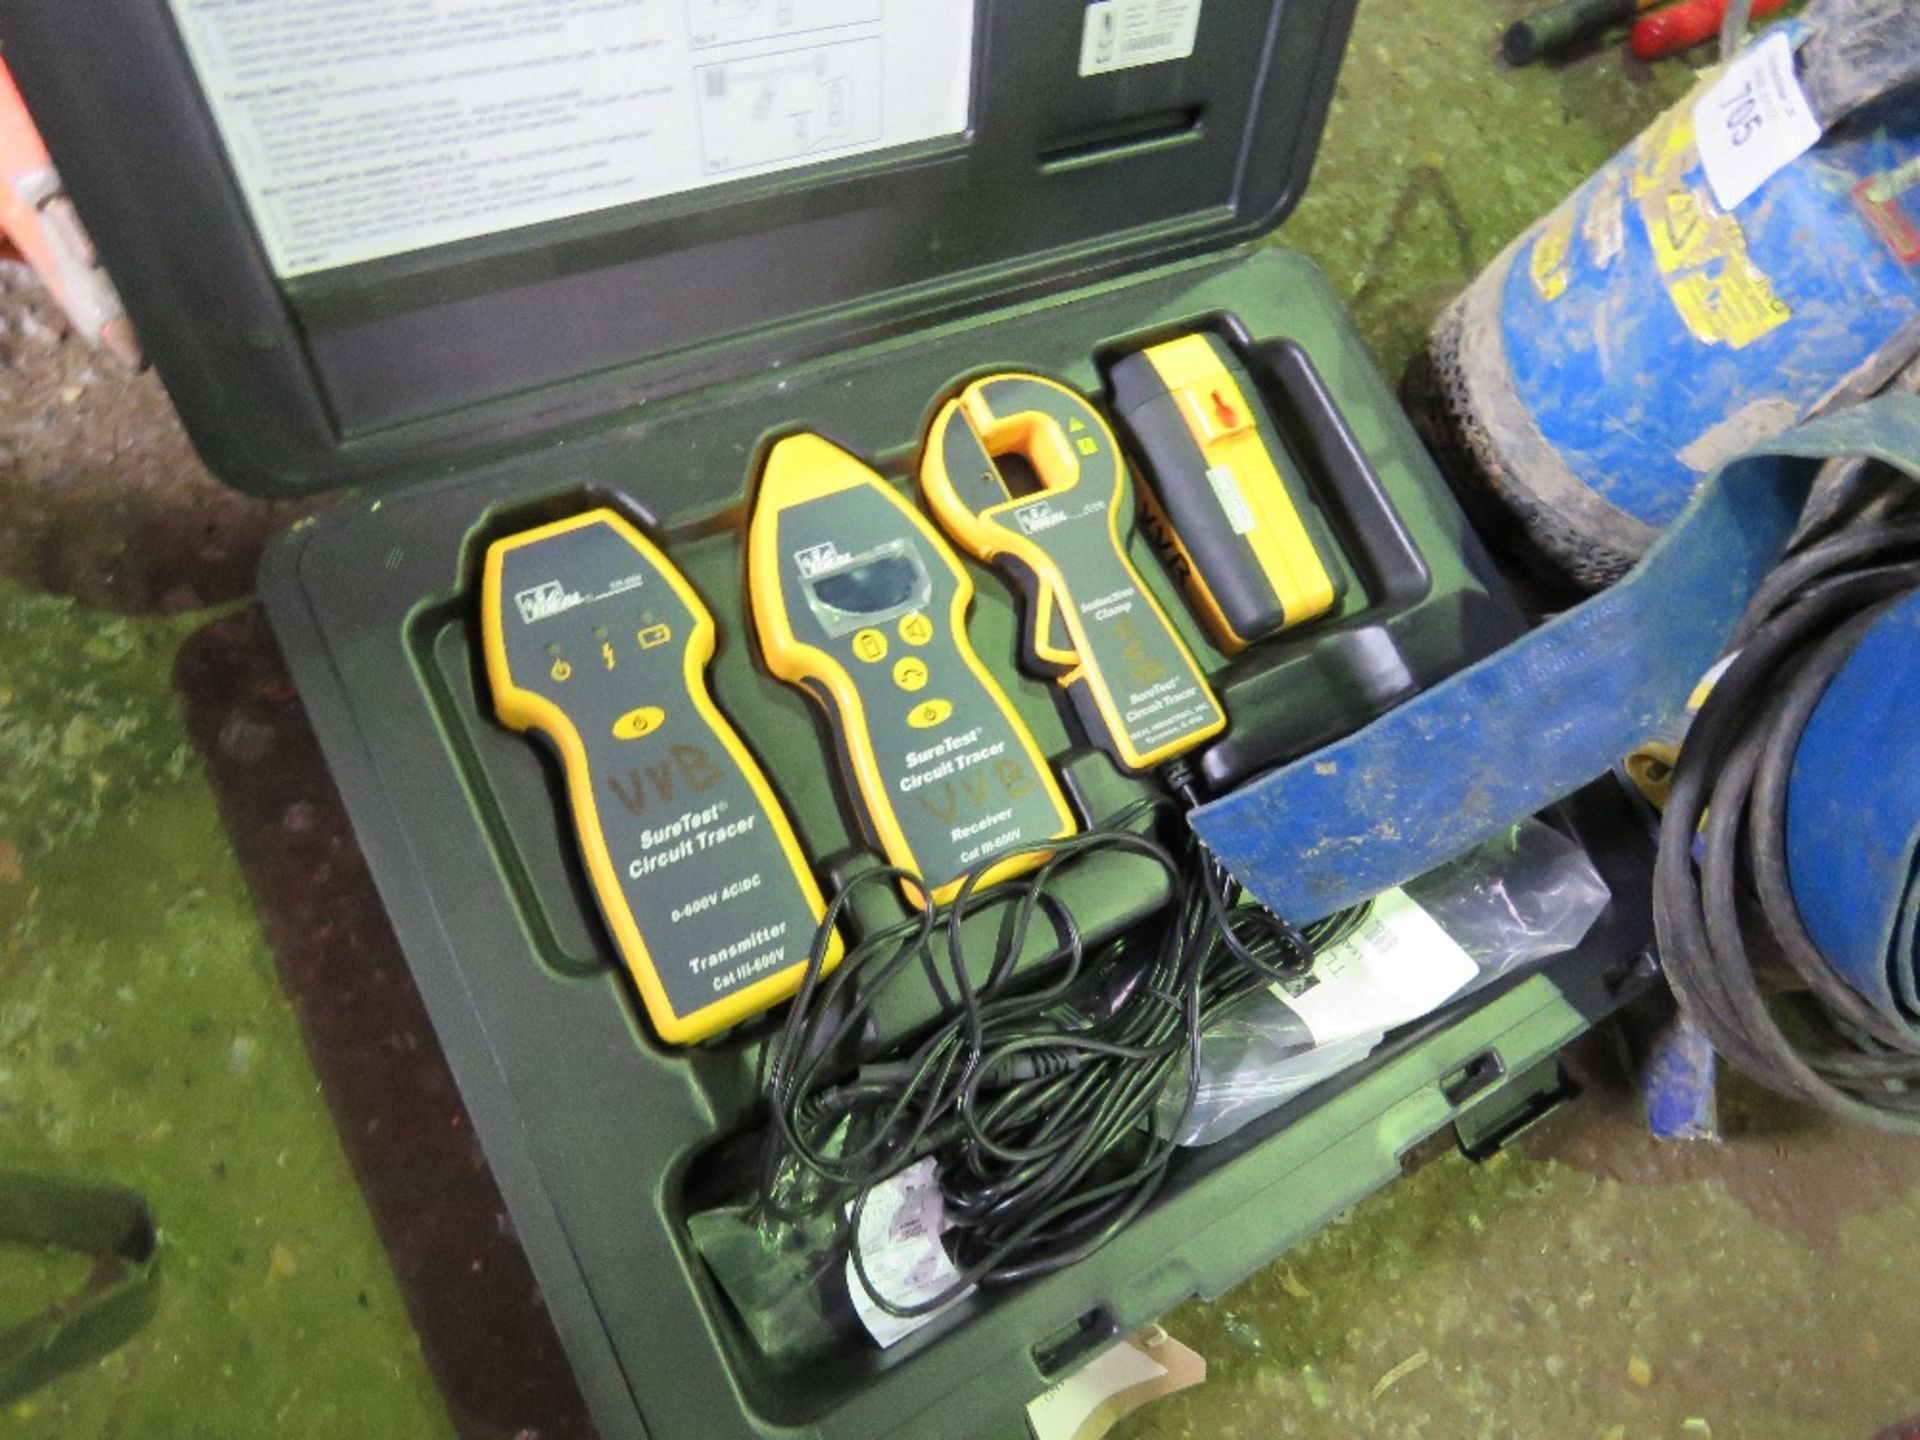 IDEAL ELECTRIC TEST KIT OPEN AND CLOSED CIRCUITS. SOURCED FROM DEPOT CLEARANCE DUE TO A CHANGE IN CO